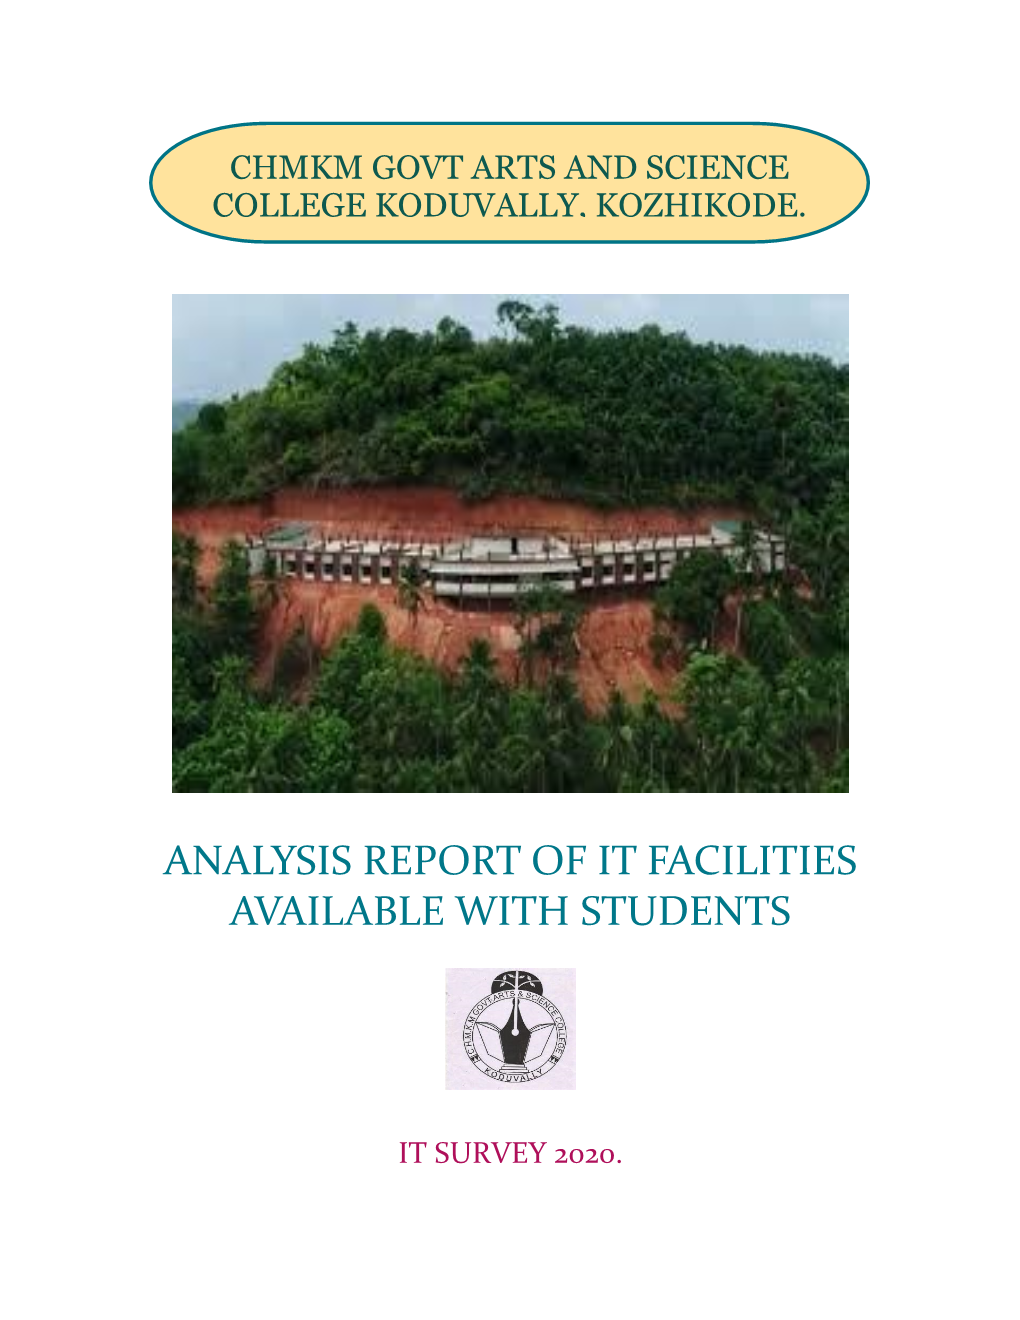 Analysis Report of It Facilities Available with Students